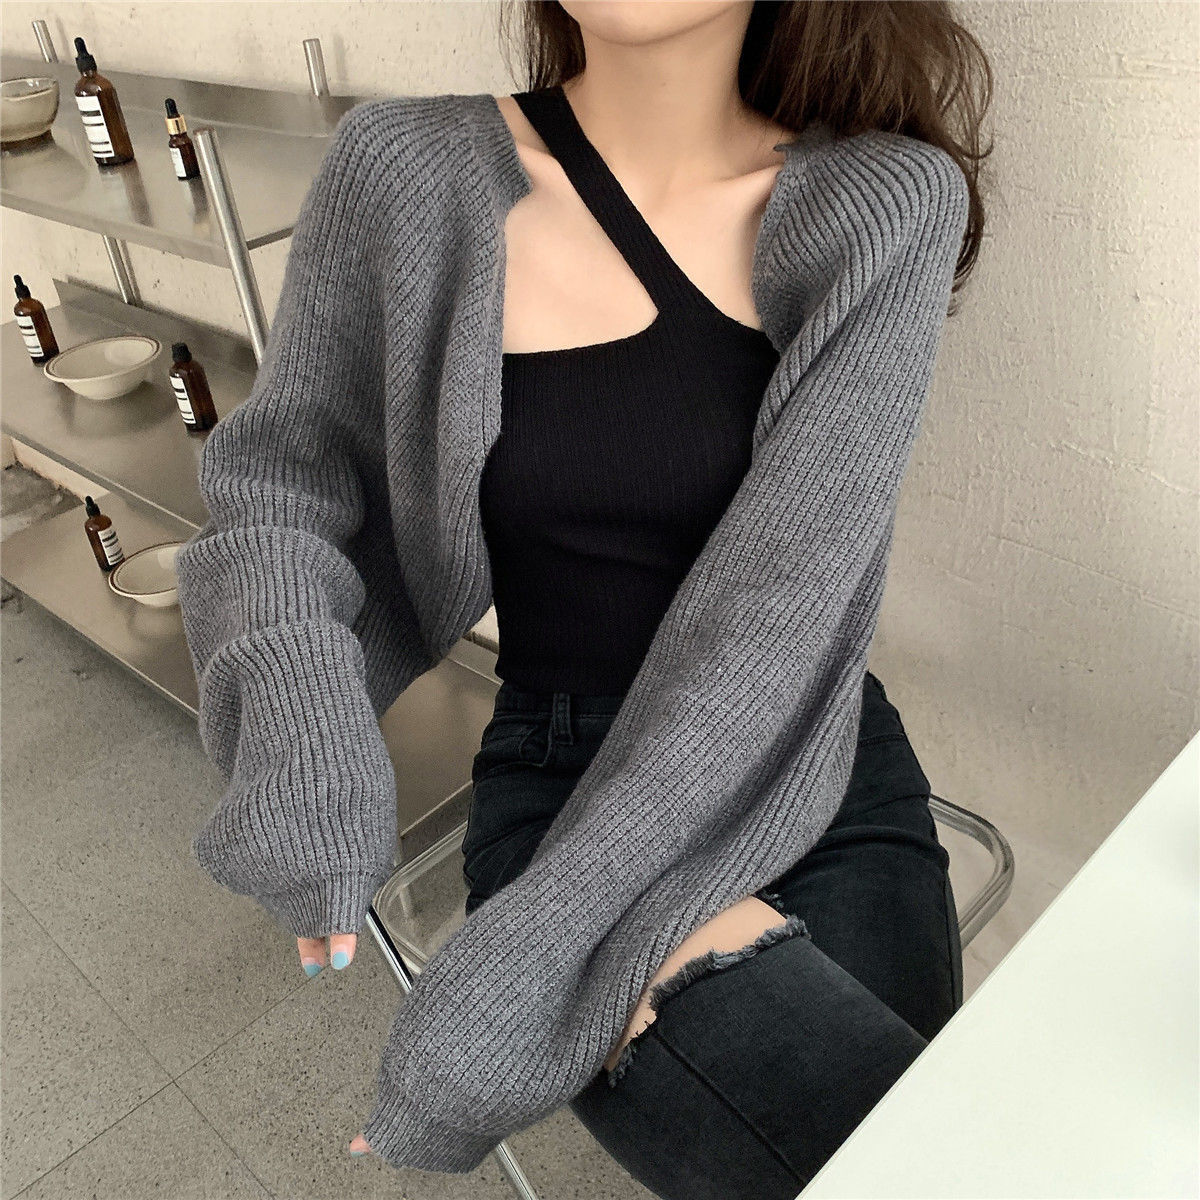 

Women' Knits Tees Woman Sweaters Cardigan Autumn Black Short Knitted Sweater Coat Loose Long Sleeves Outer Match Knitwear Top 221206, Grey sweater